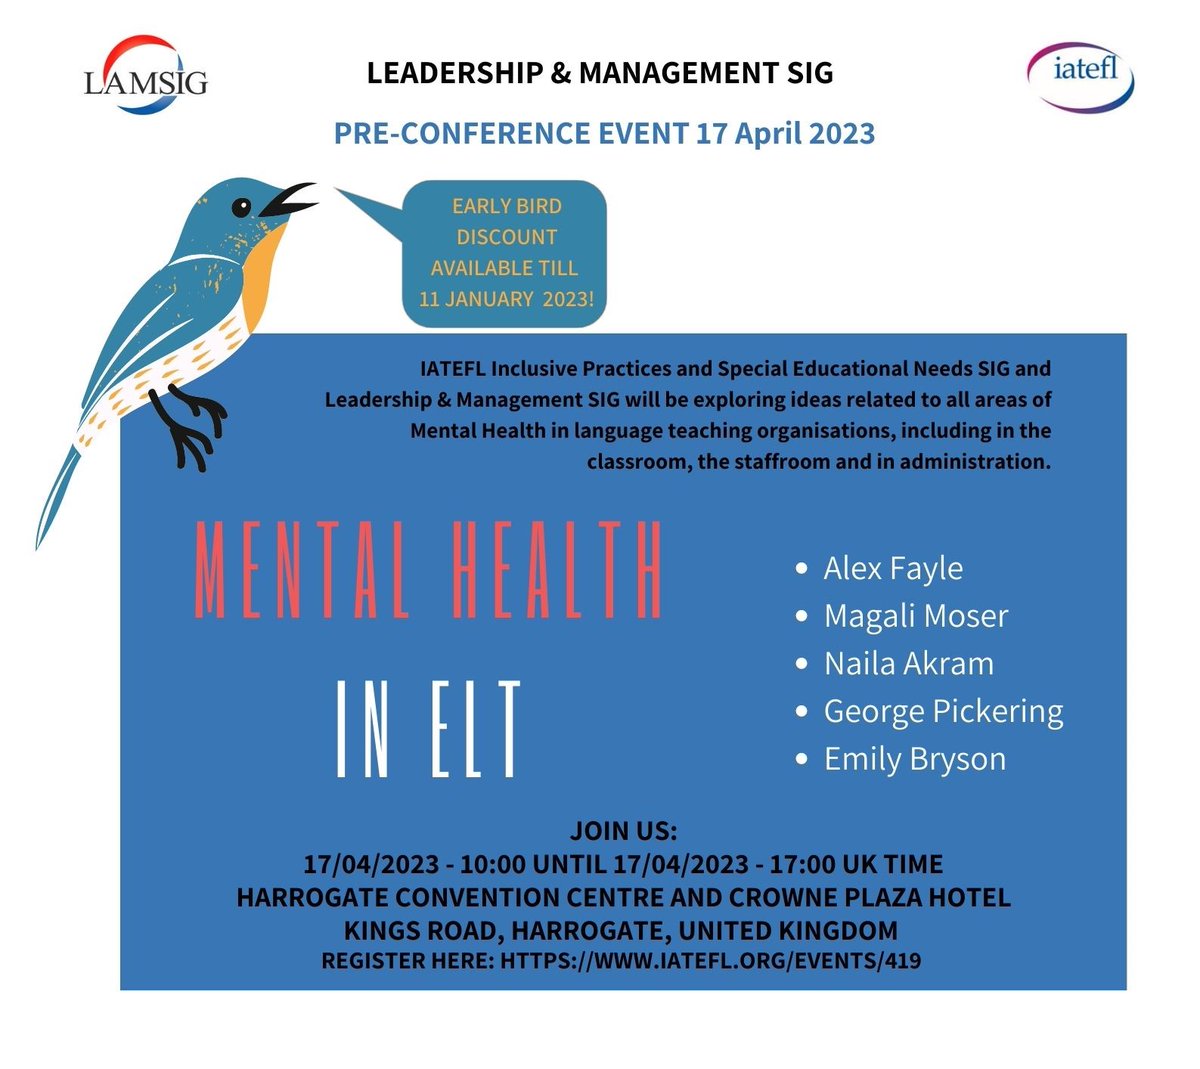 Join IATEFL Inclusive Practices and Special Educational Needs SIG and Leadership & Management SIG for our joint 2023 Pre-Conference Event on 17 April 2023. Early bird fees: Until 11 January 2023! iatefl.org/events/419 #iatefl #lamsig #leadership #management #elt #efl